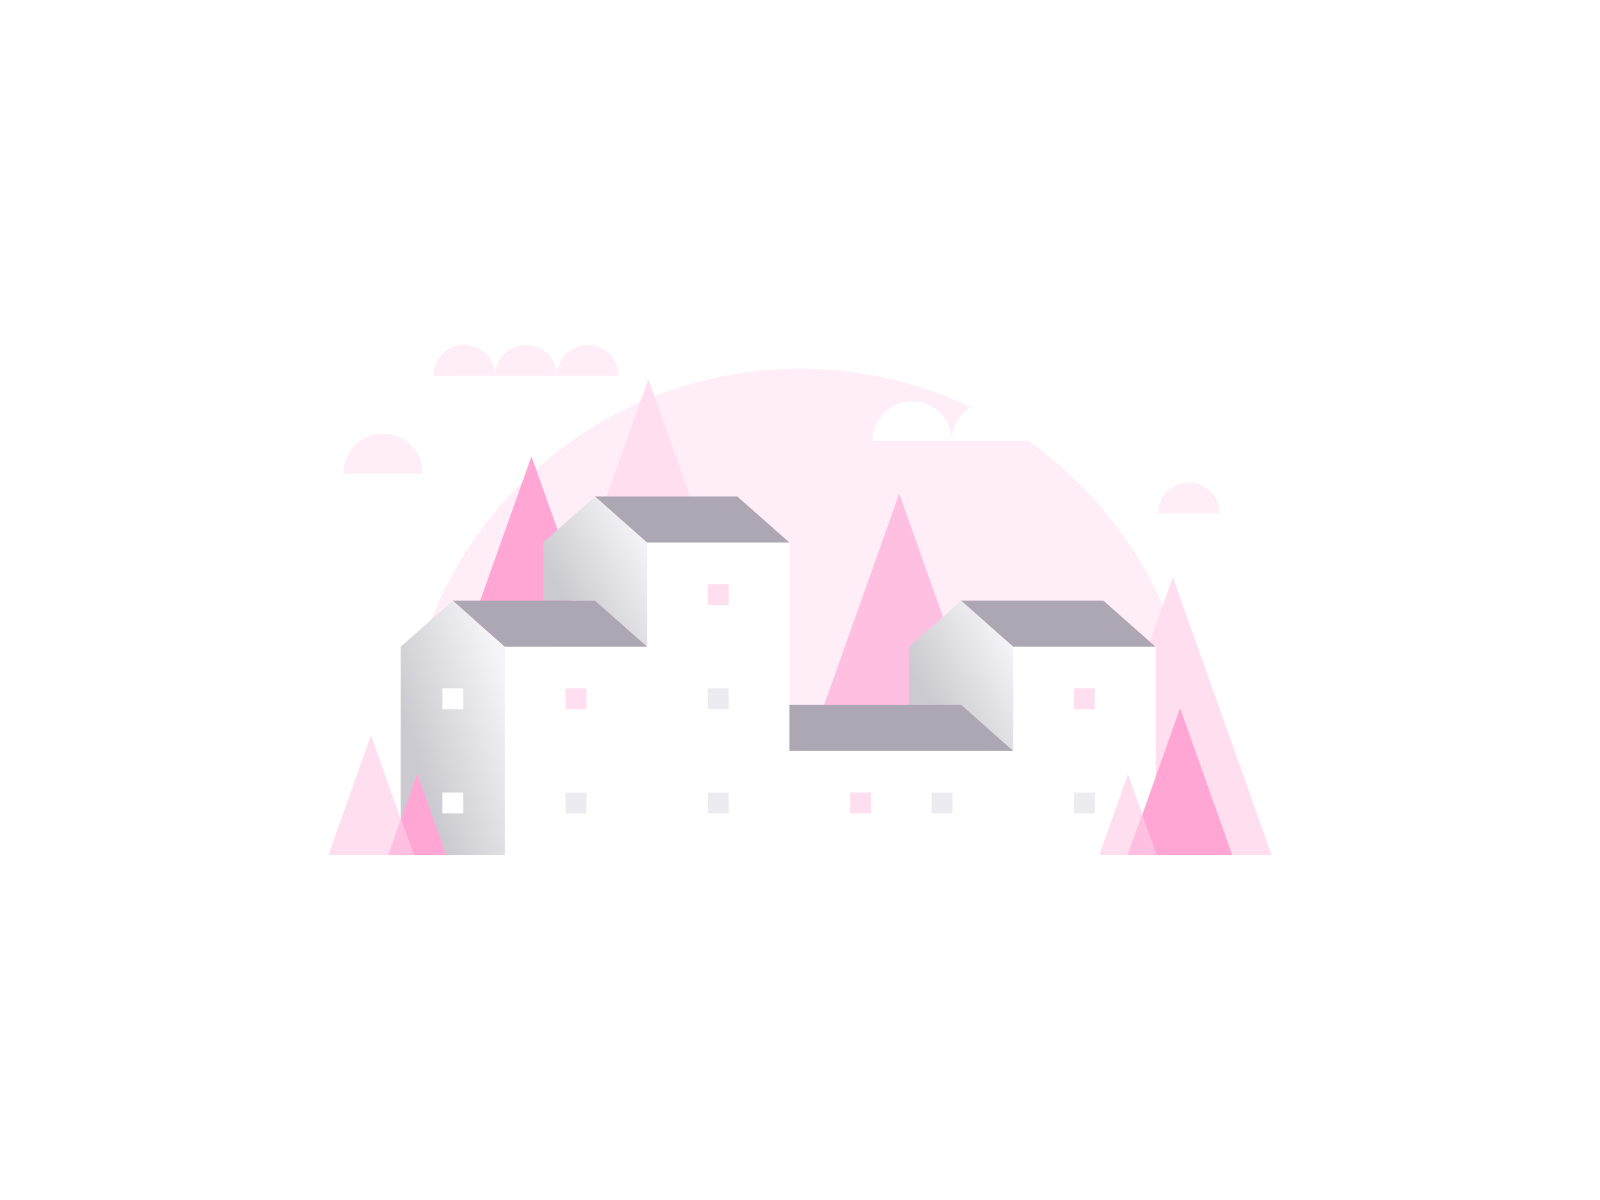 Pink Building Illustration row abstract city trees town homes agrib architecture apartments residential shades of pink pink design vector illustration grayscale greyscale pink illustration buildings illustration negative space landscape design